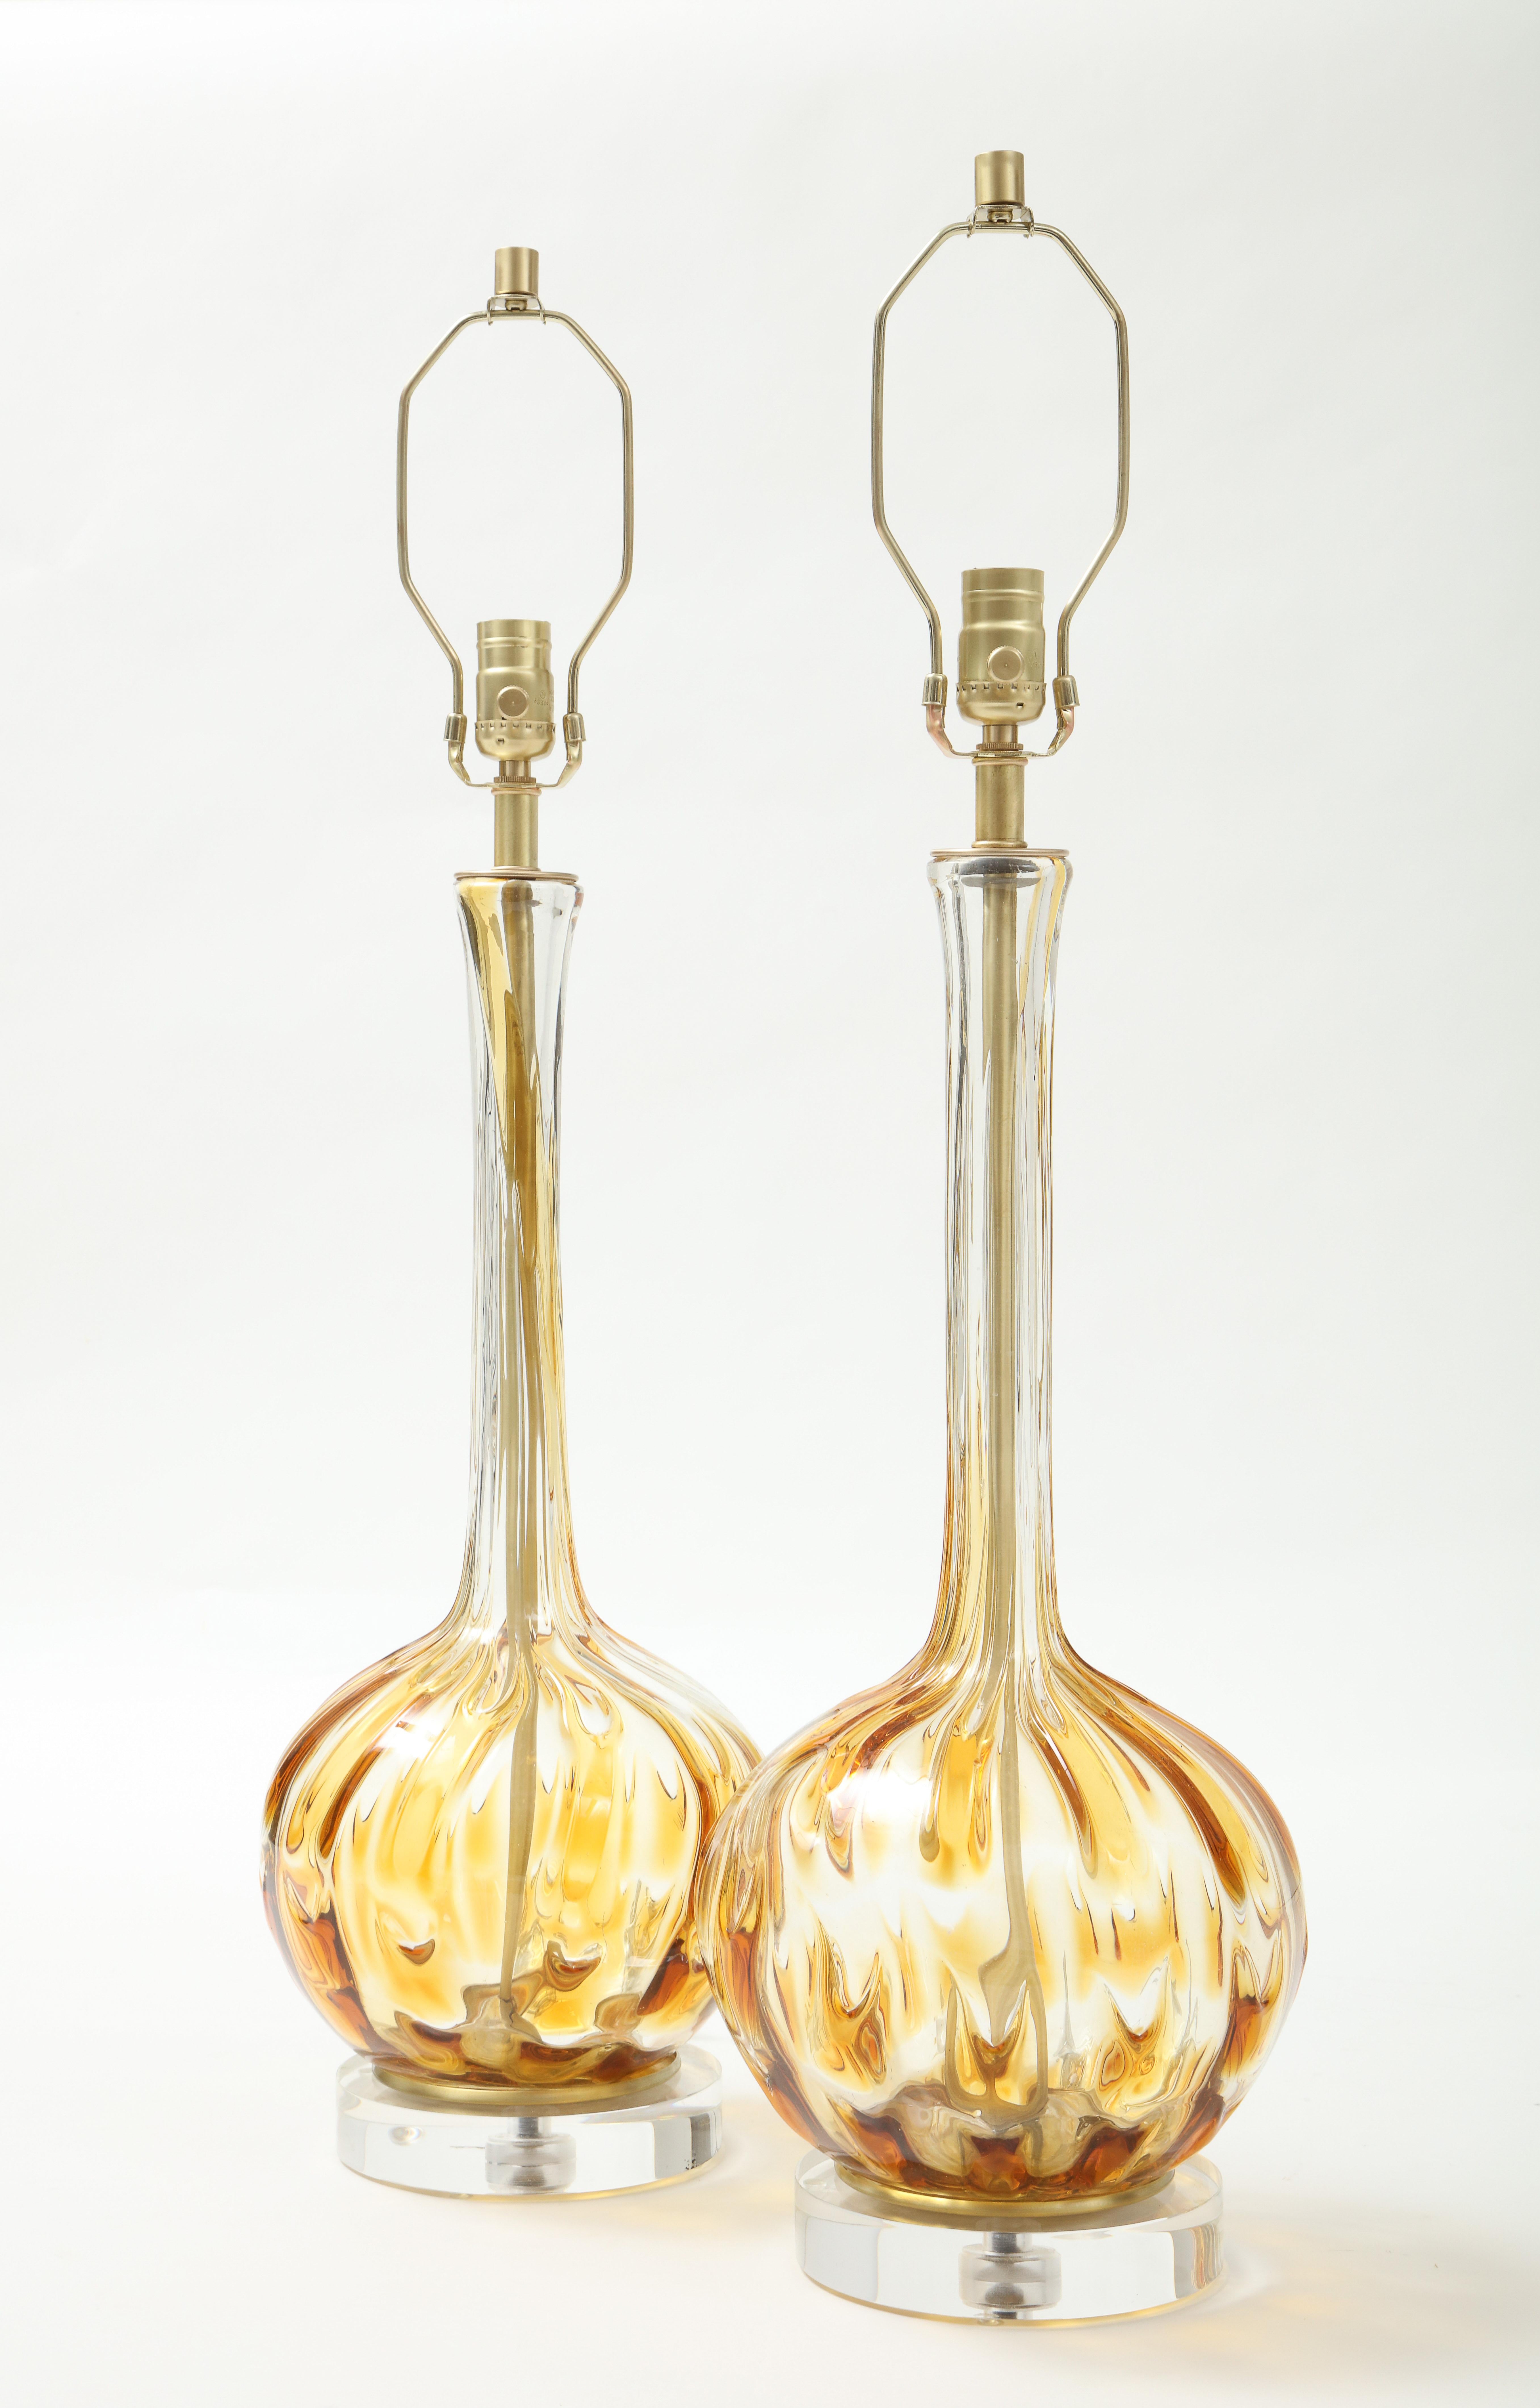 Pair of Murano genie bottle form lamps in clear Murano glass with honey colored inclusions, sitting on lucite and brass bases. Professionally rewired. 100W max.